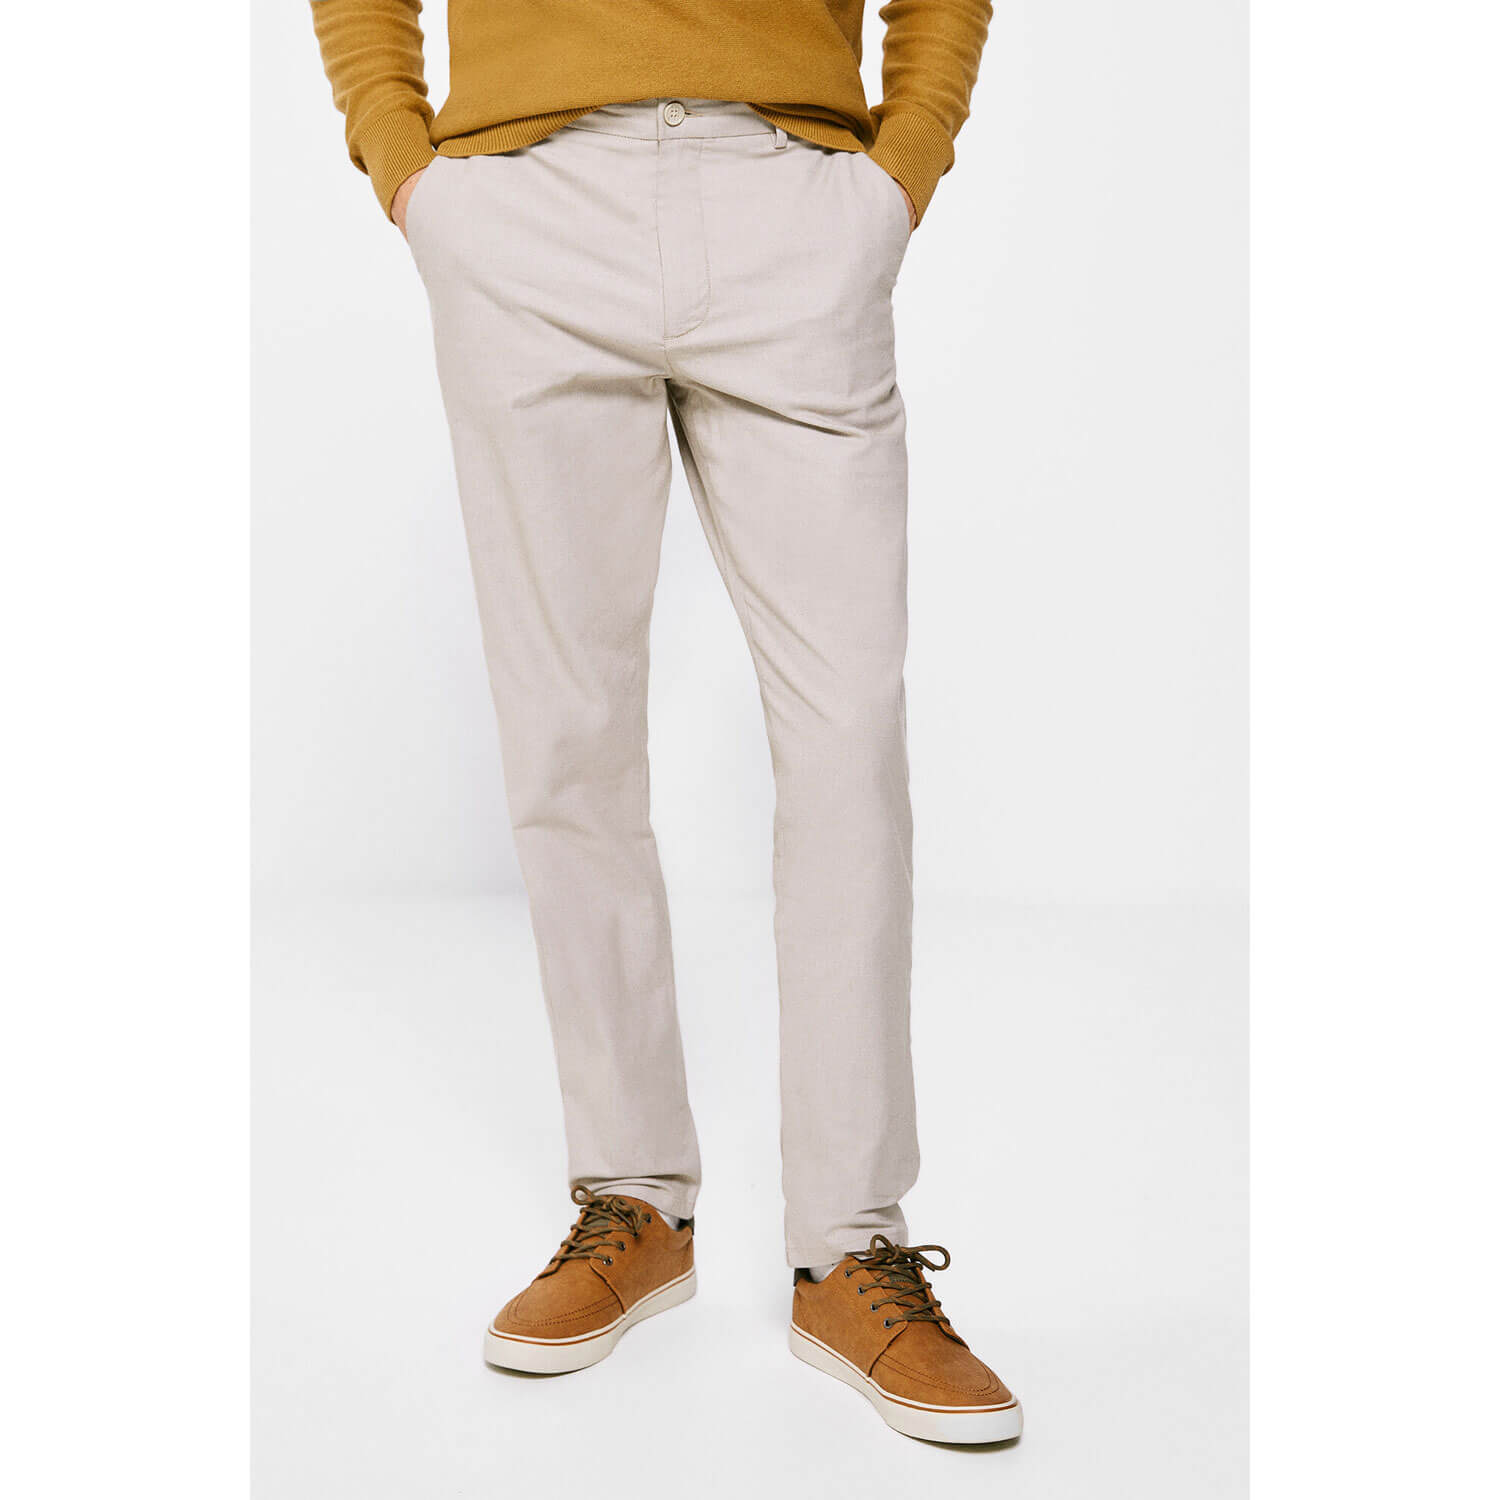 Springfield Patterned Chino - Beige 1 Shaws Department Stores